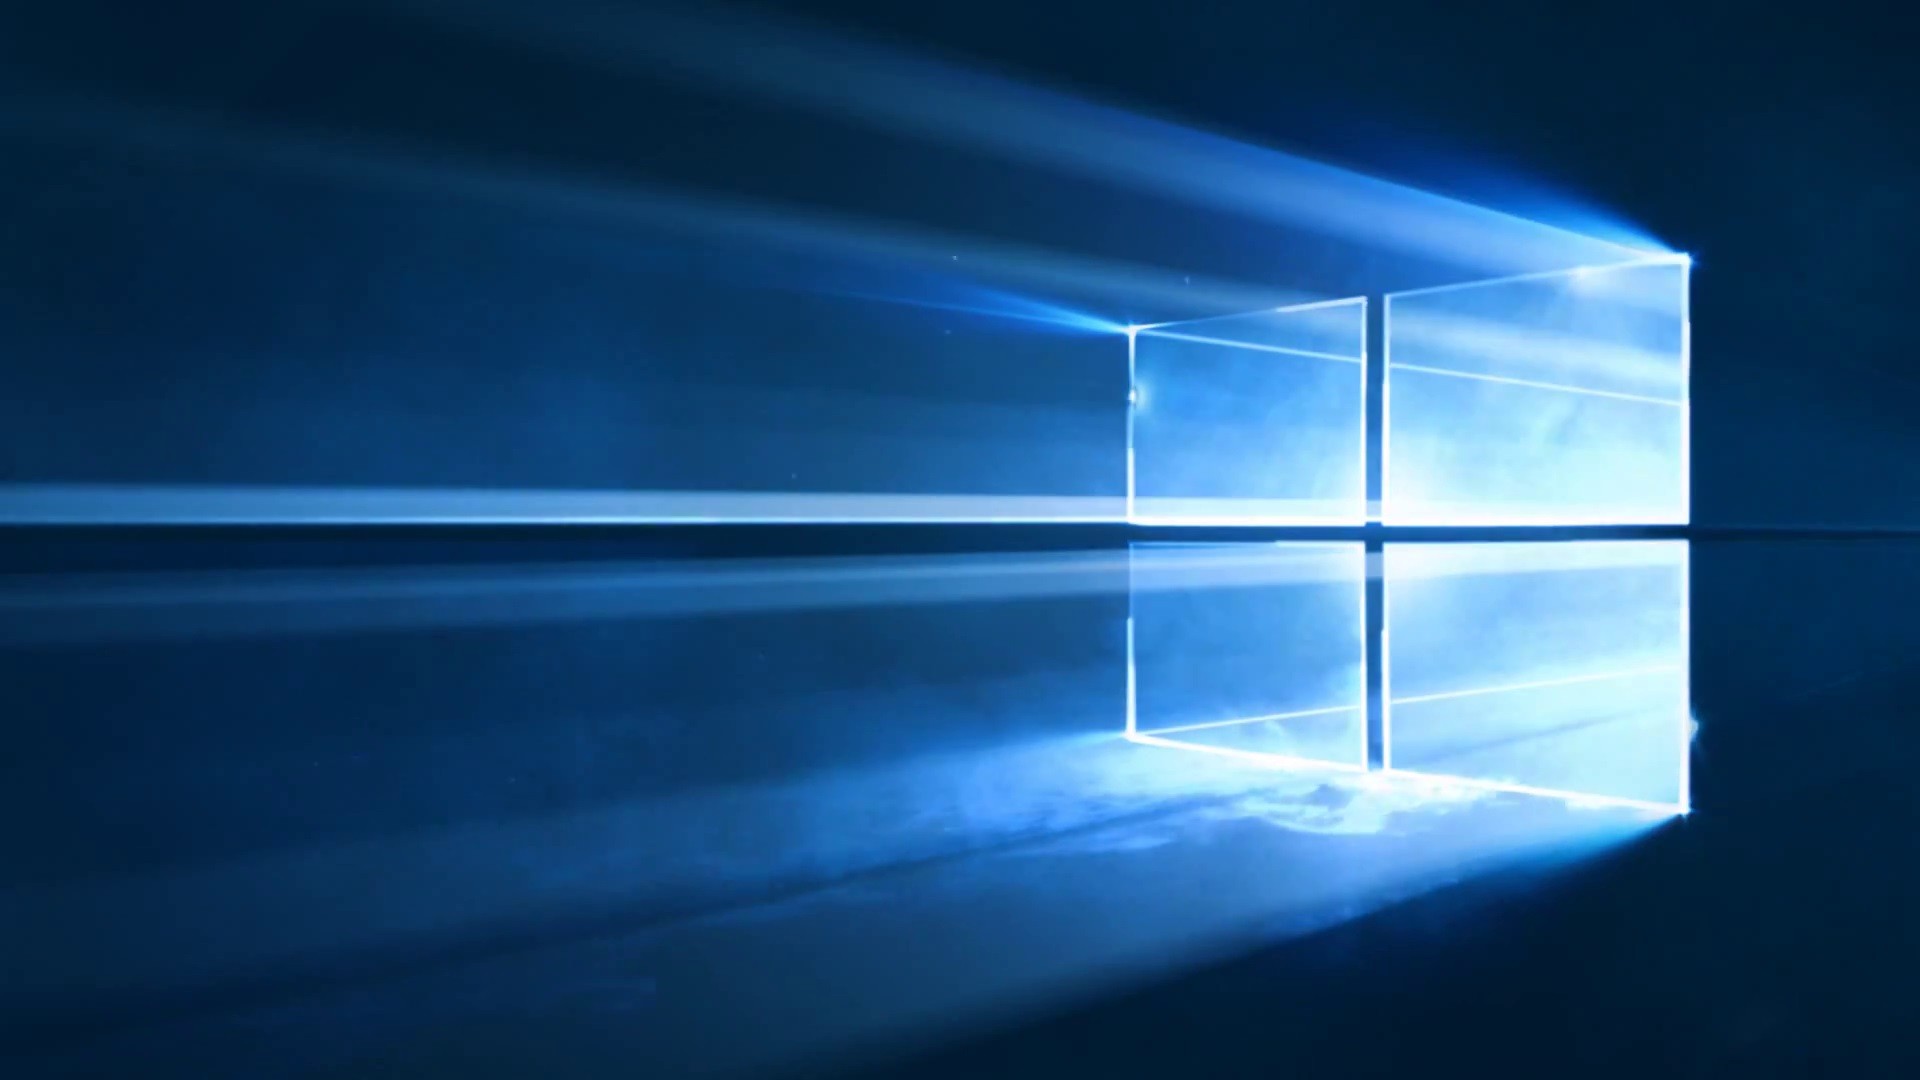 So this is the new default wallpaper for windows 10 1920x1080